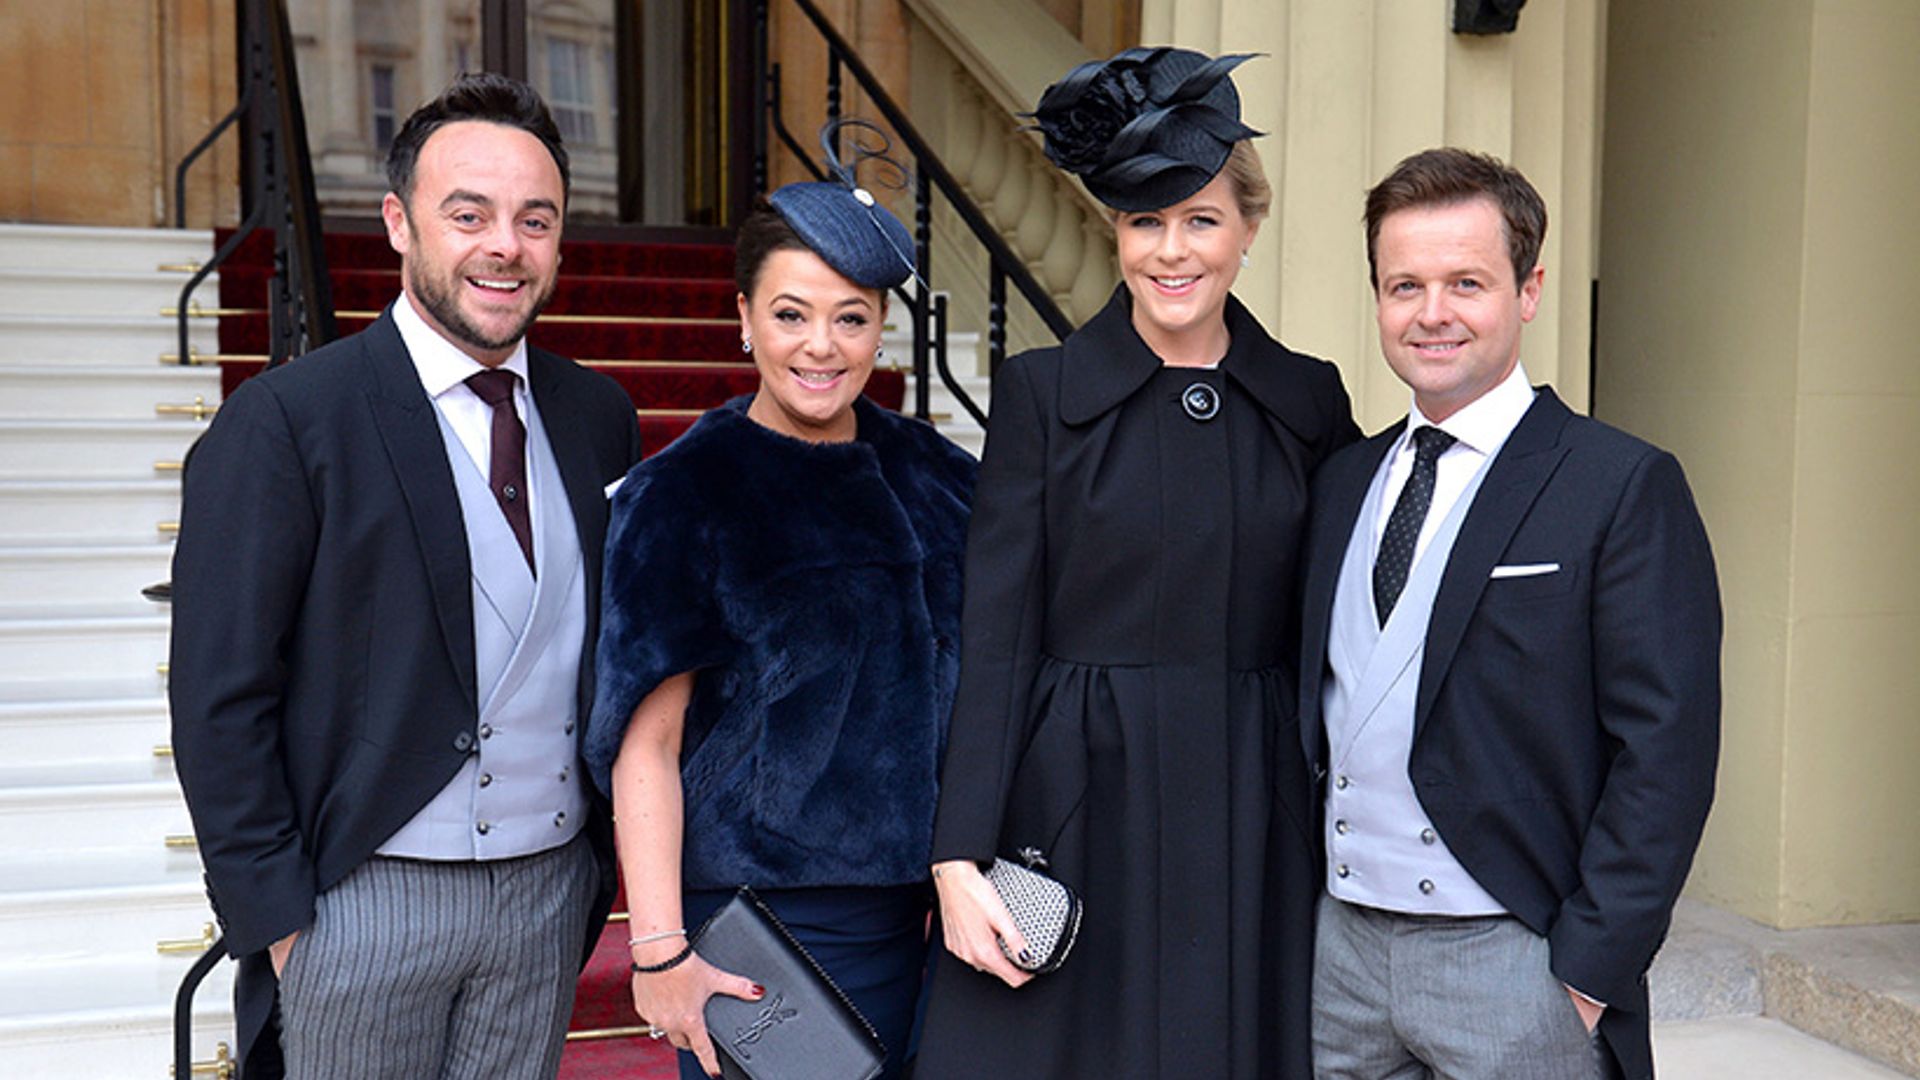 Ant and Dec pose with proud wives as they are awarded OBEs